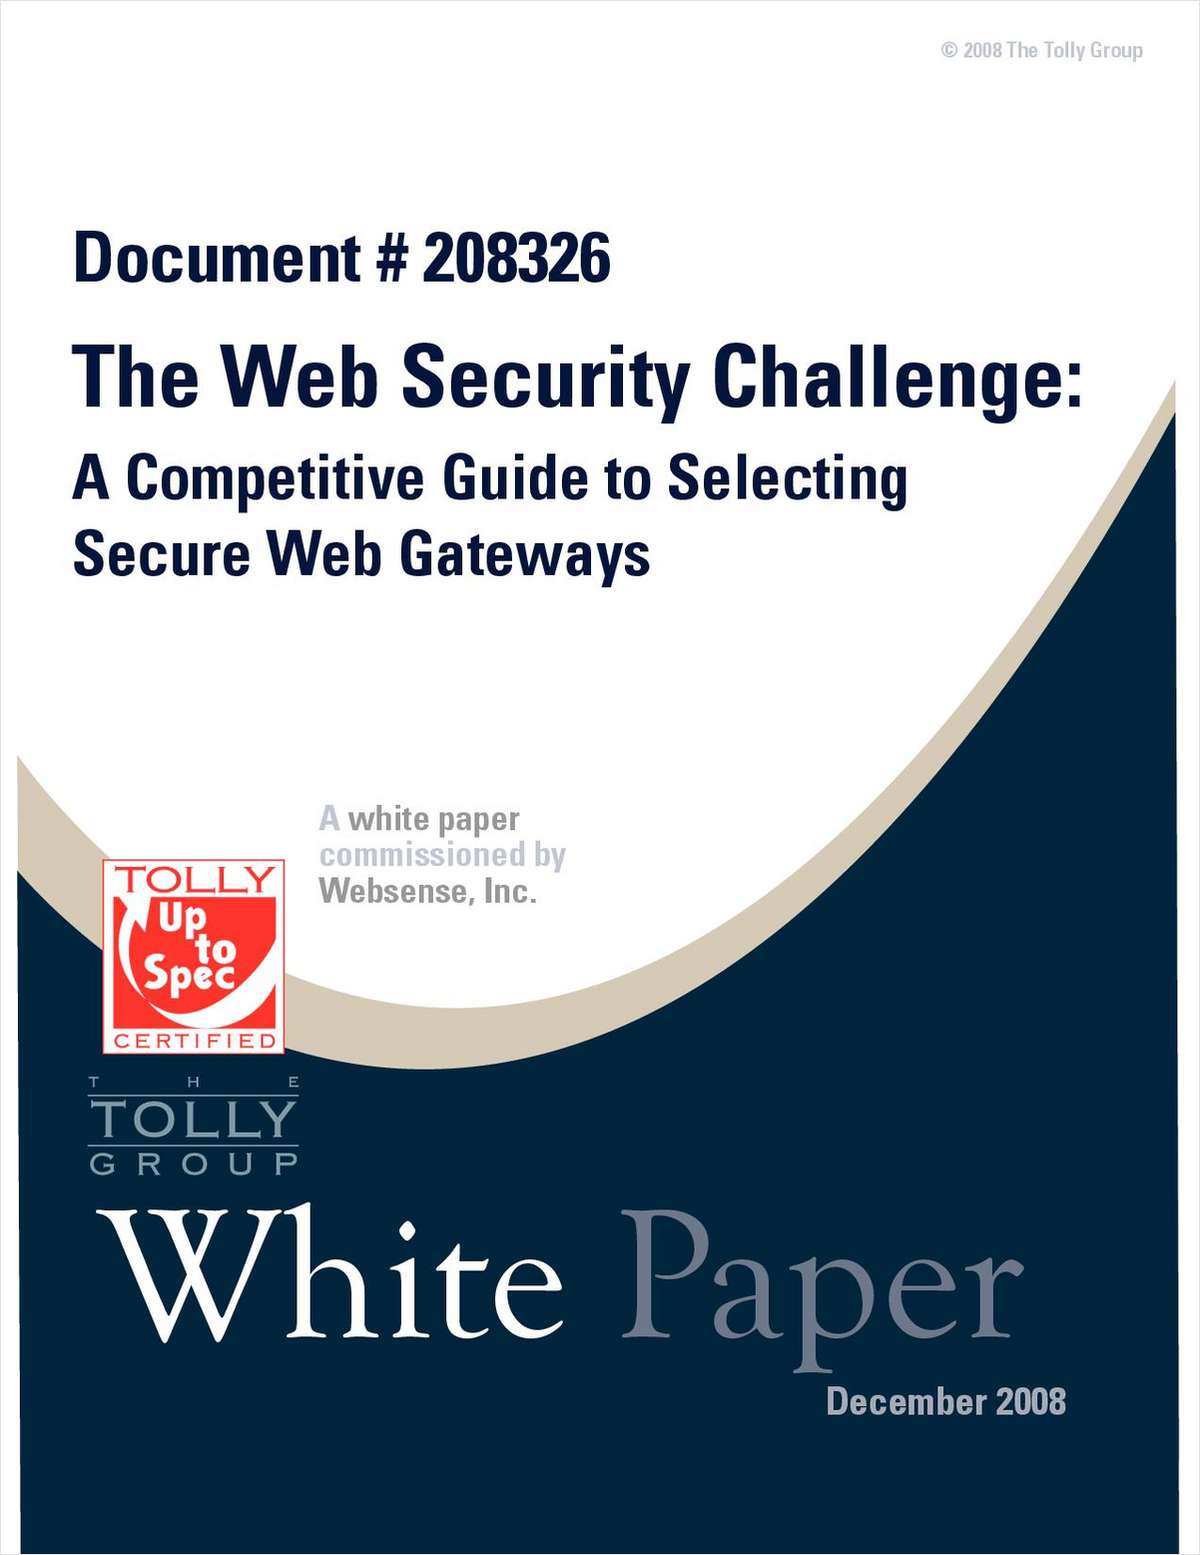 The Web Security Challenge:  A Competitive Guide to Selecting Secure Web Gateways